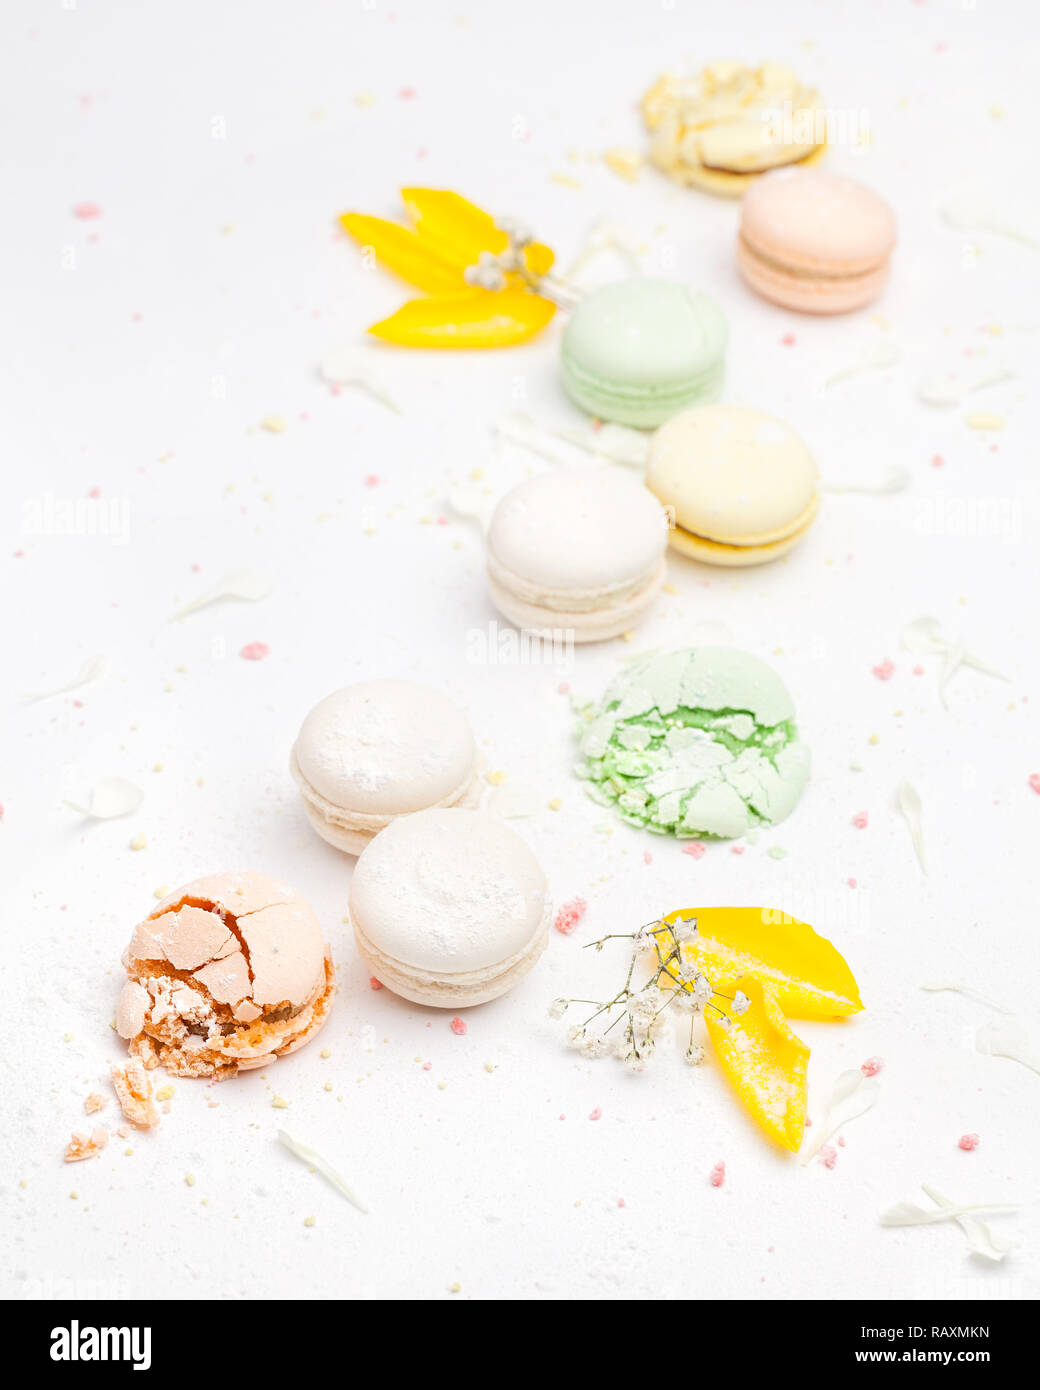 Colorful French macarons on white background with sugar powder and flower petals around Stock Photo